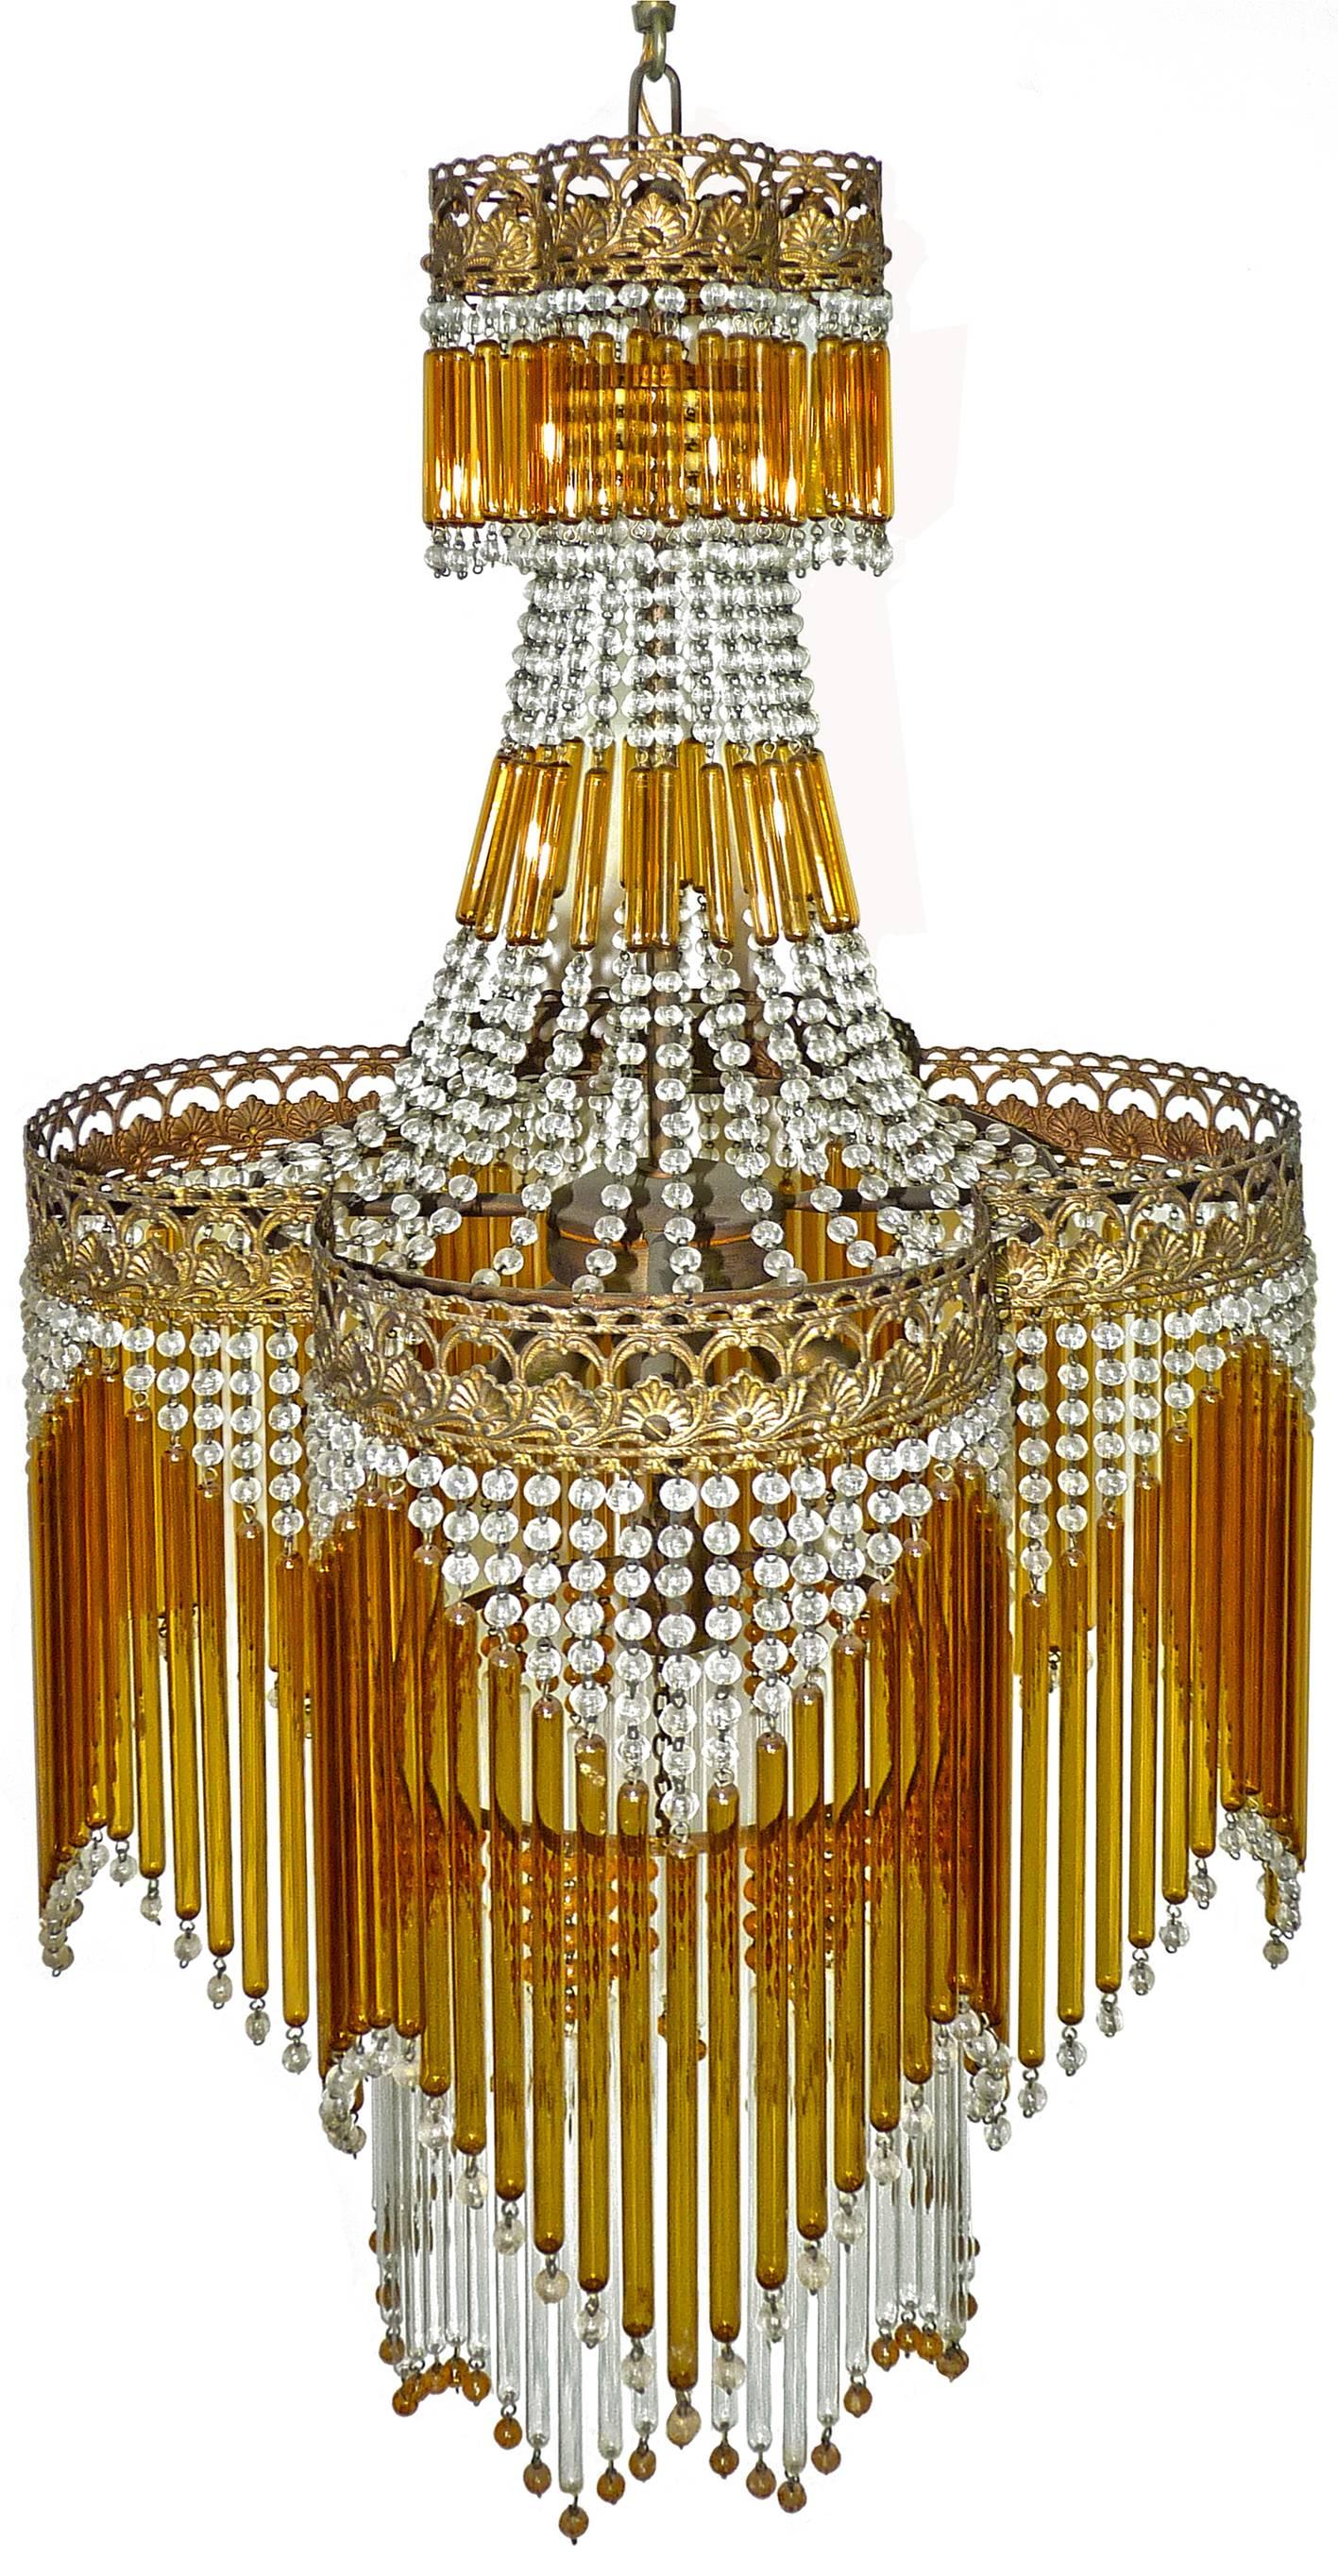 Fabulous Italian Mid-Century in clear and amber Murano beaded glass Art Deco / Art Nouveau chandelier
Measures: Diameter 40 cm
height 95 cm
Five light bulbs E14/ good working condition/European wiring.
Age patina
Also have matching chandeliers